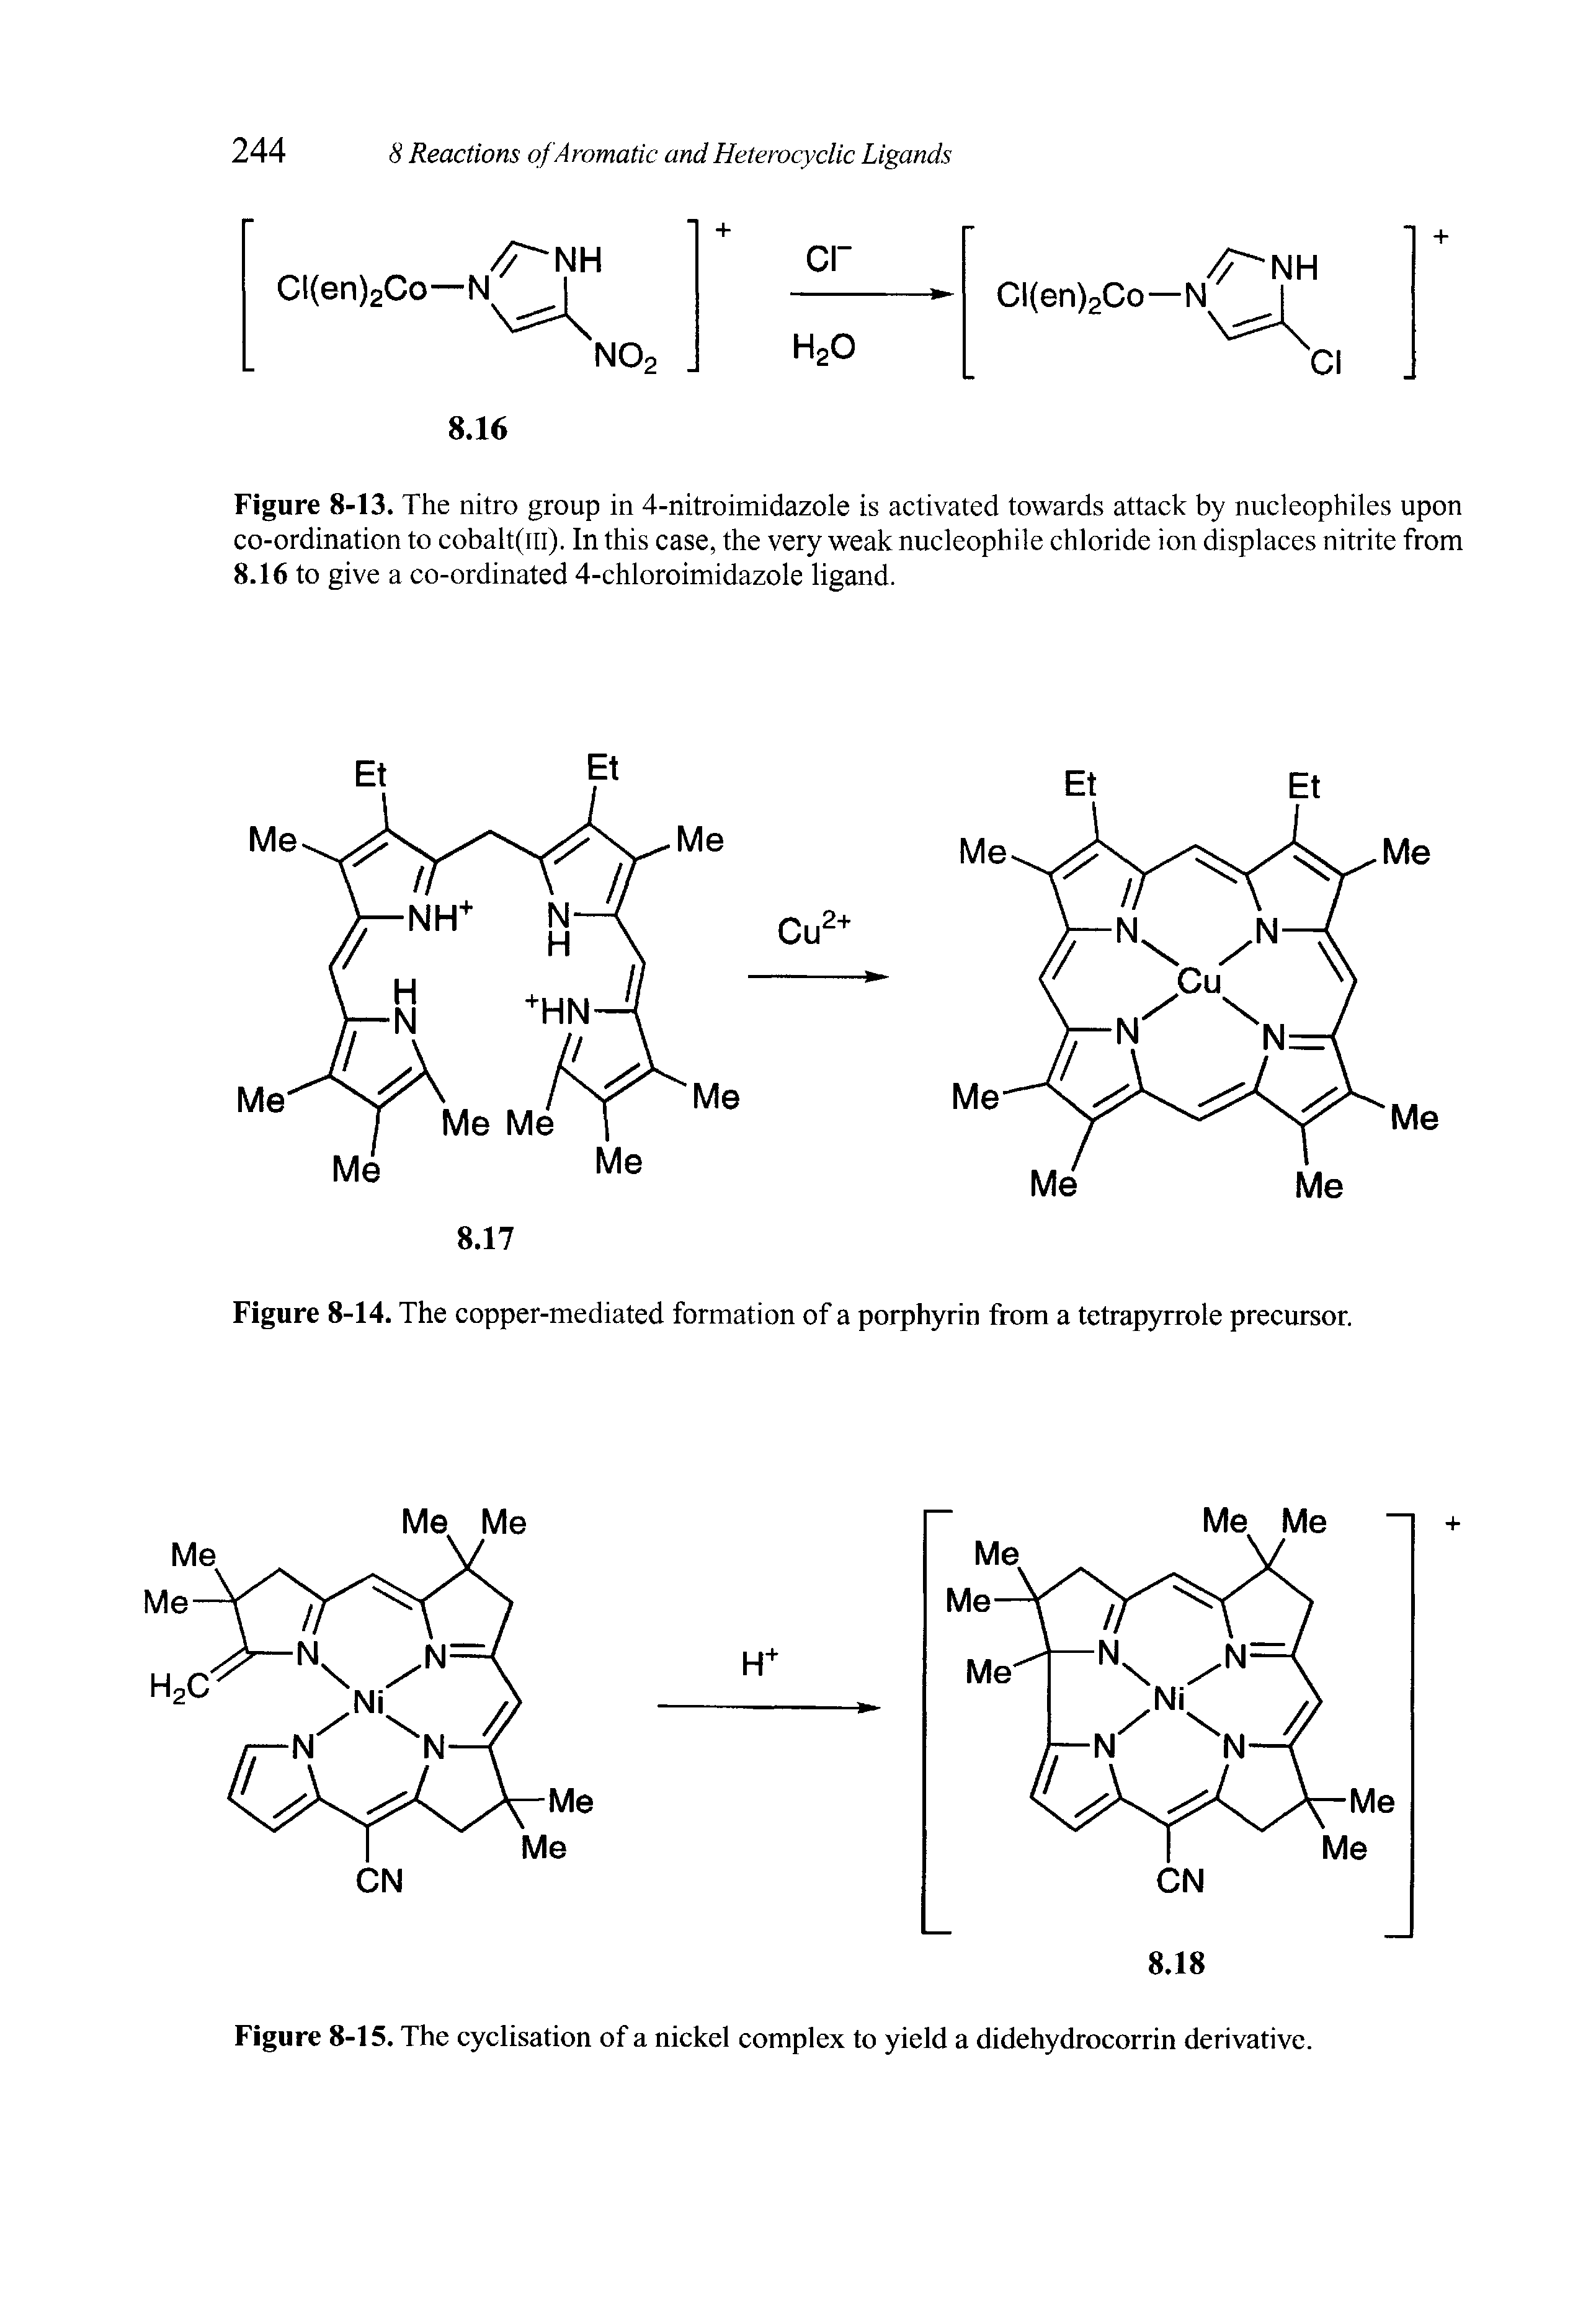 Figure 8-13. The nitro group in 4-nitroimidazole is activated towards attack by nucleophiles upon co-ordination to cobalt(m). In this case, the very weak nucleophile chloride ion displaces nitrite from 8.16 to give a co-ordinated 4-chloroimidazole ligand.